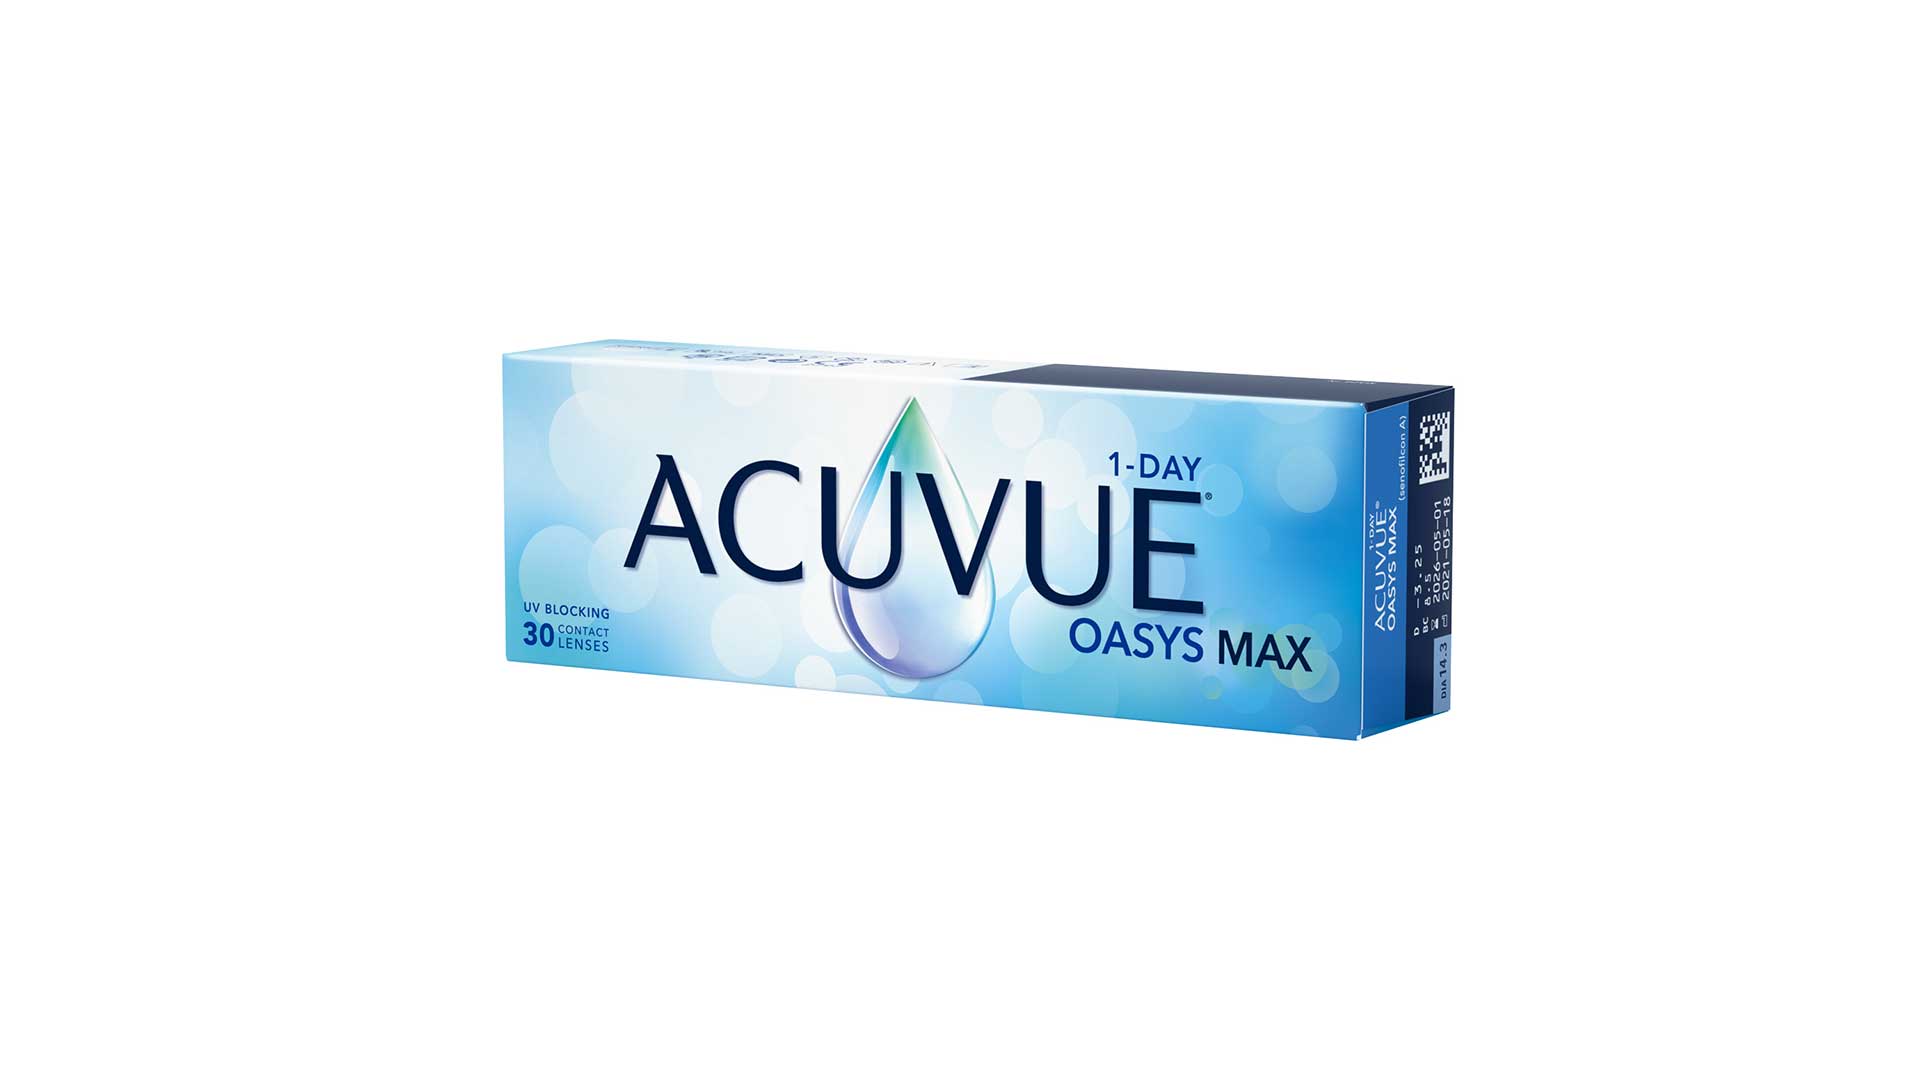 ACUVUE® OASYS MAX 1-DAY